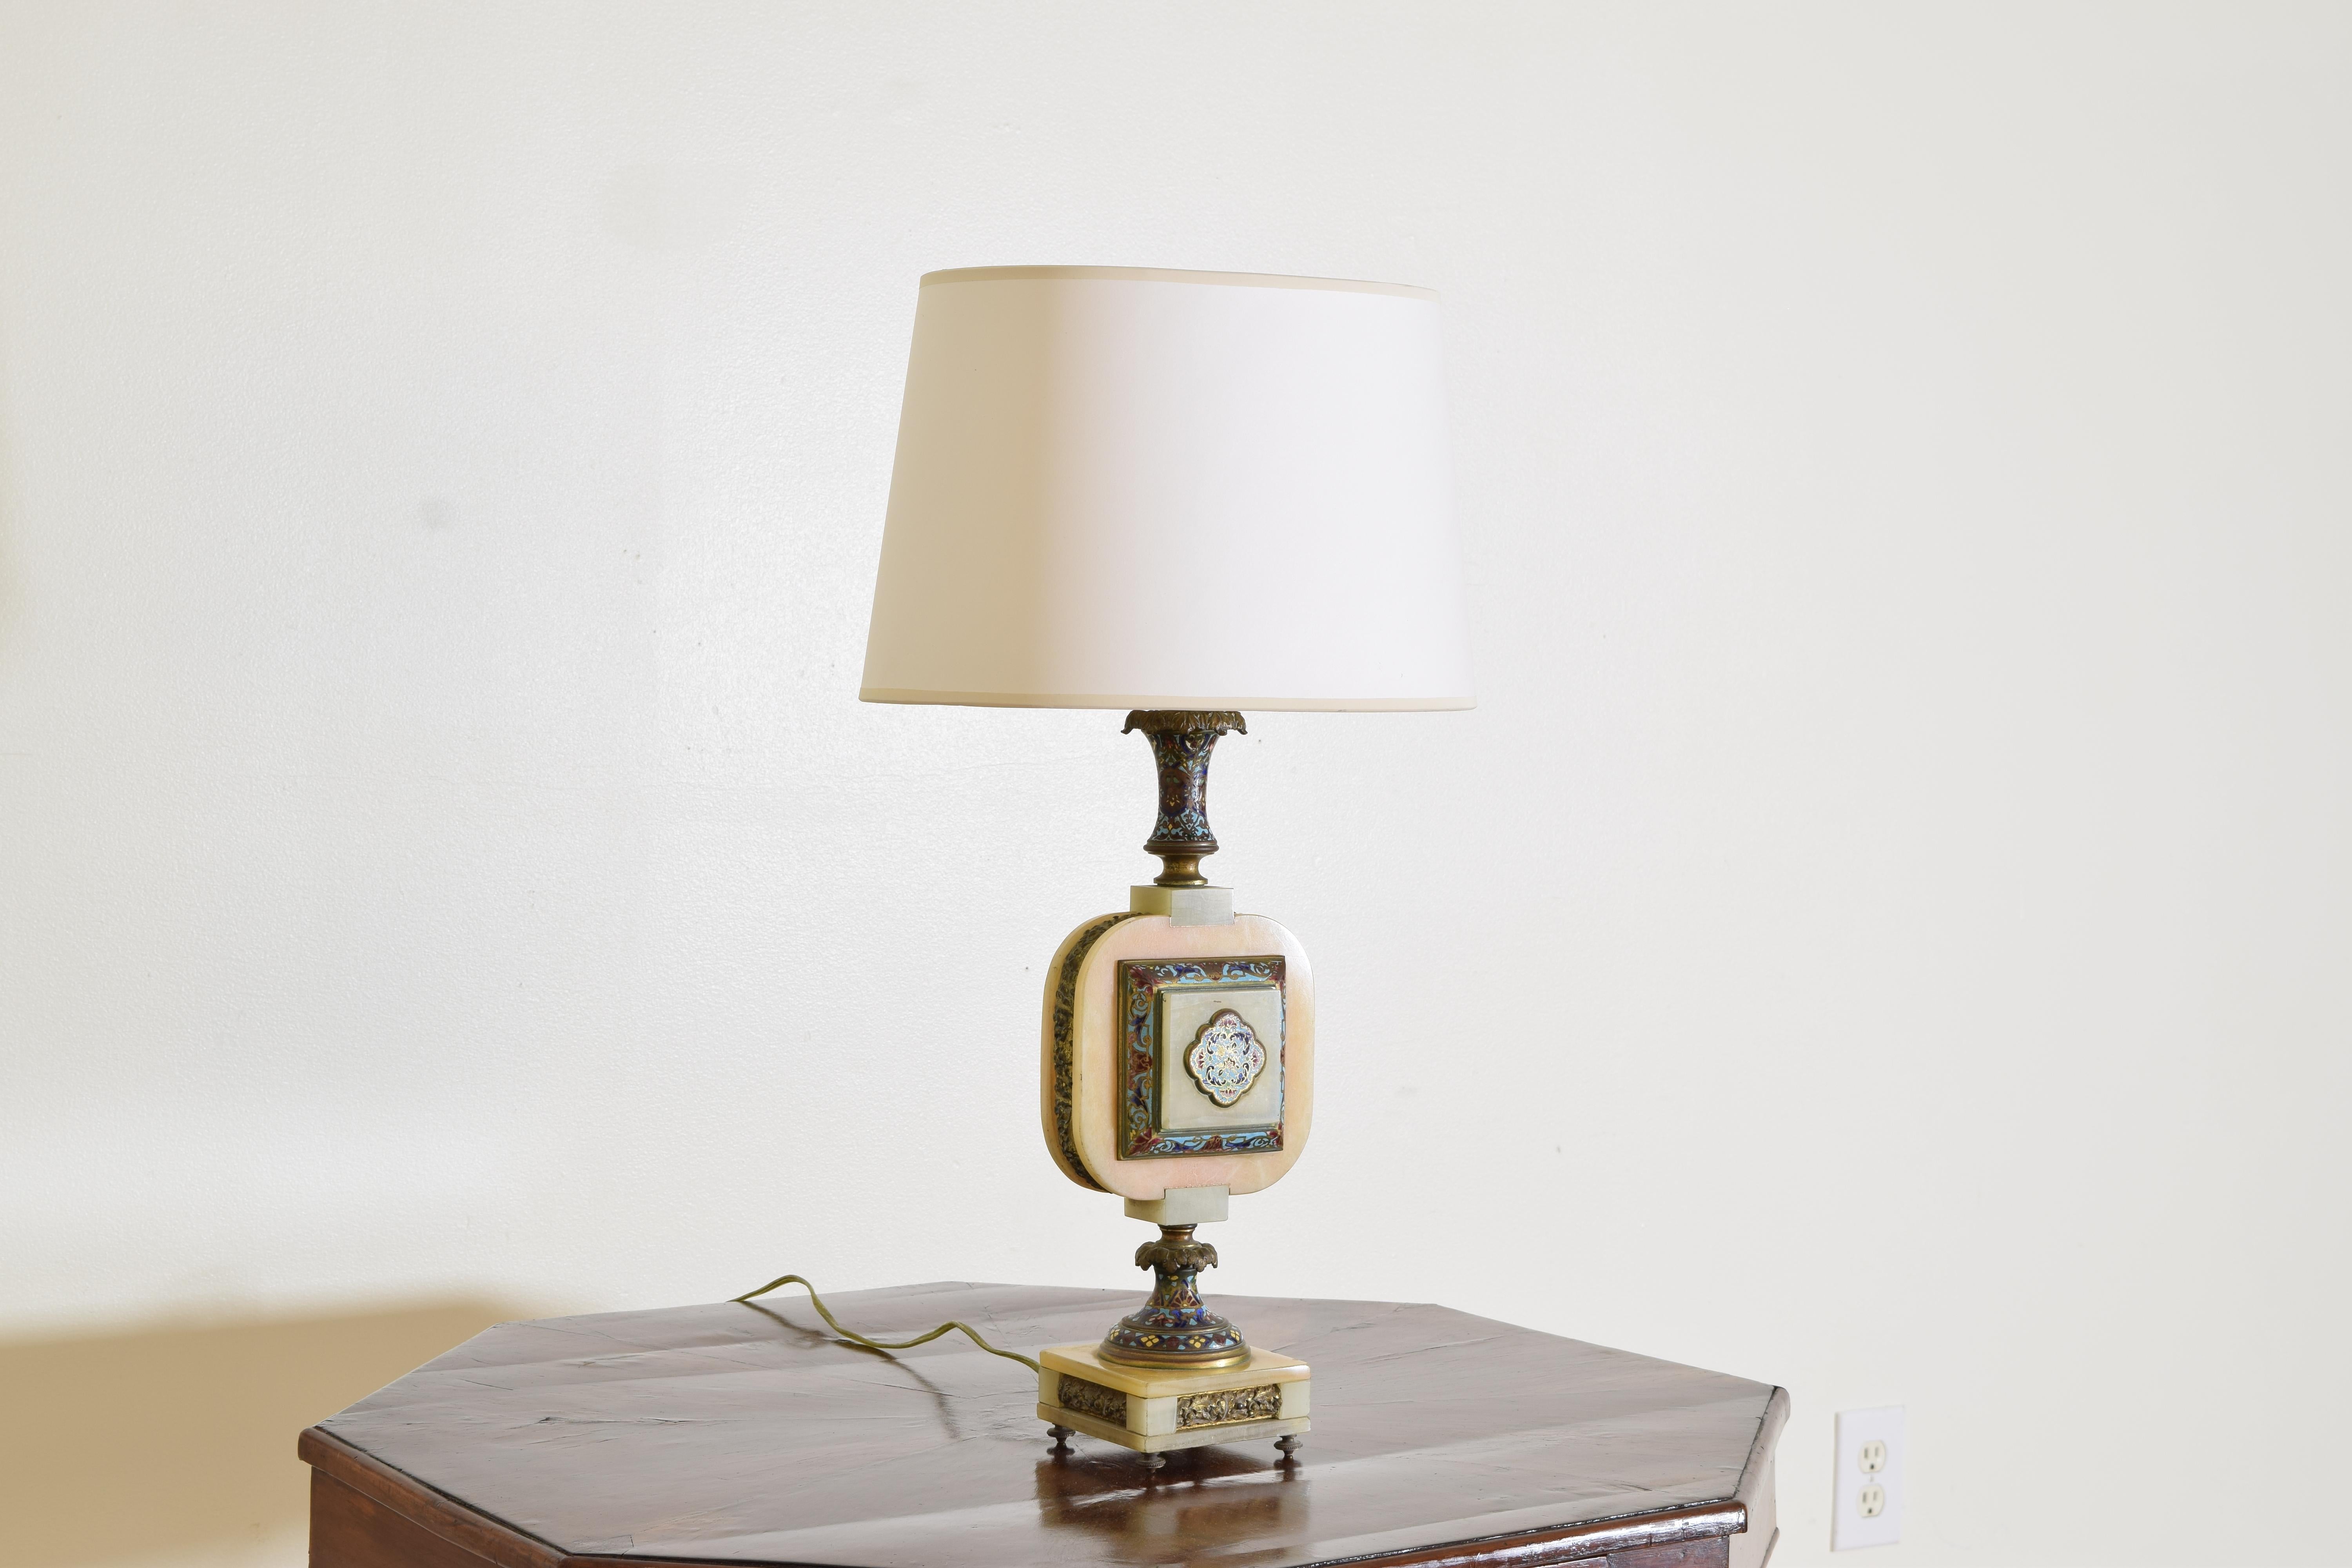 Japanese Onyx and Cloisonné Enamel Table Lamp, 1st Quarter 20th Century In Good Condition For Sale In Atlanta, GA